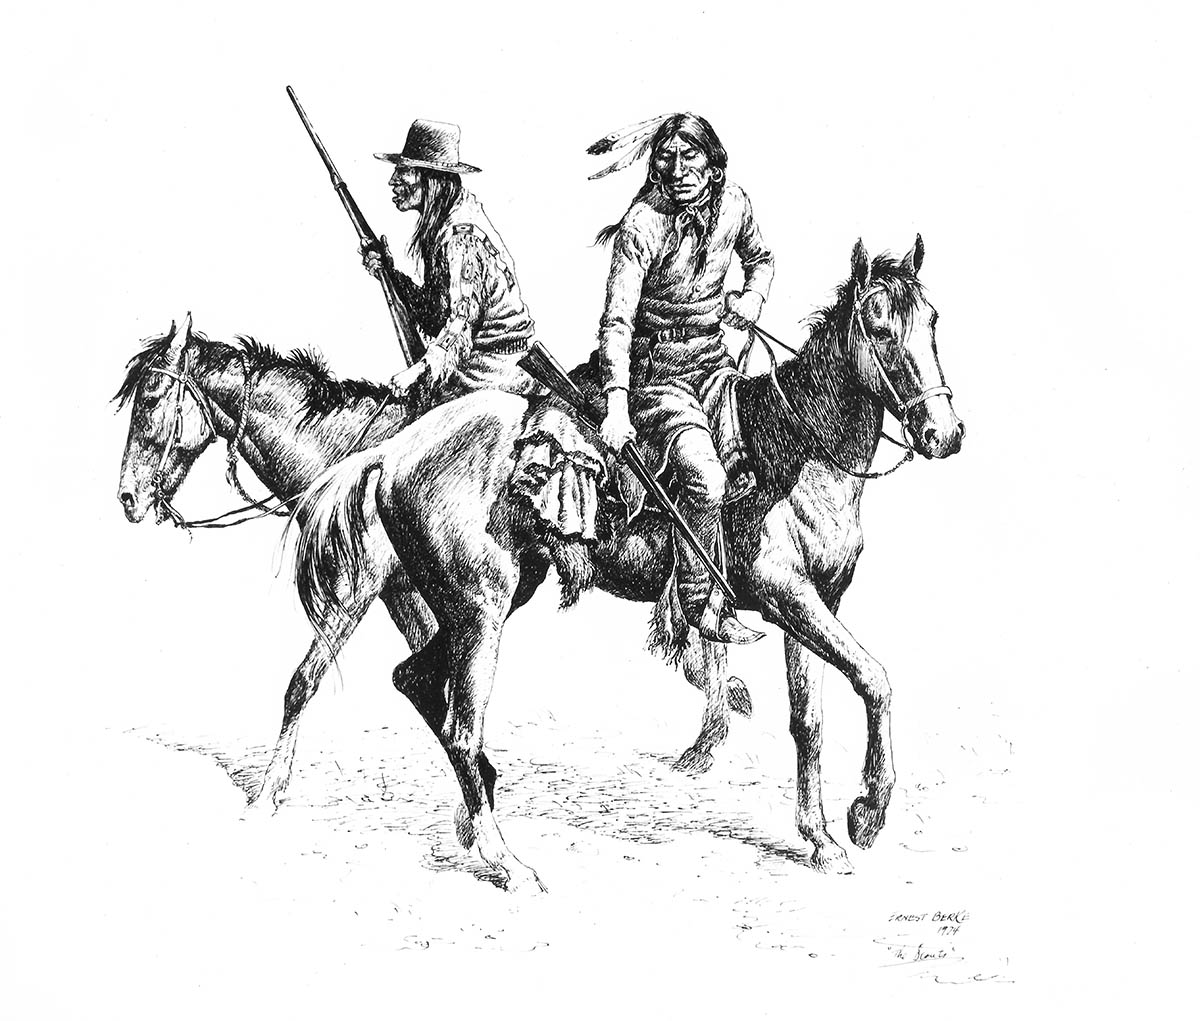 Two mounted Indian trackers looking for signs of men on horseback who might have passed by earlier.